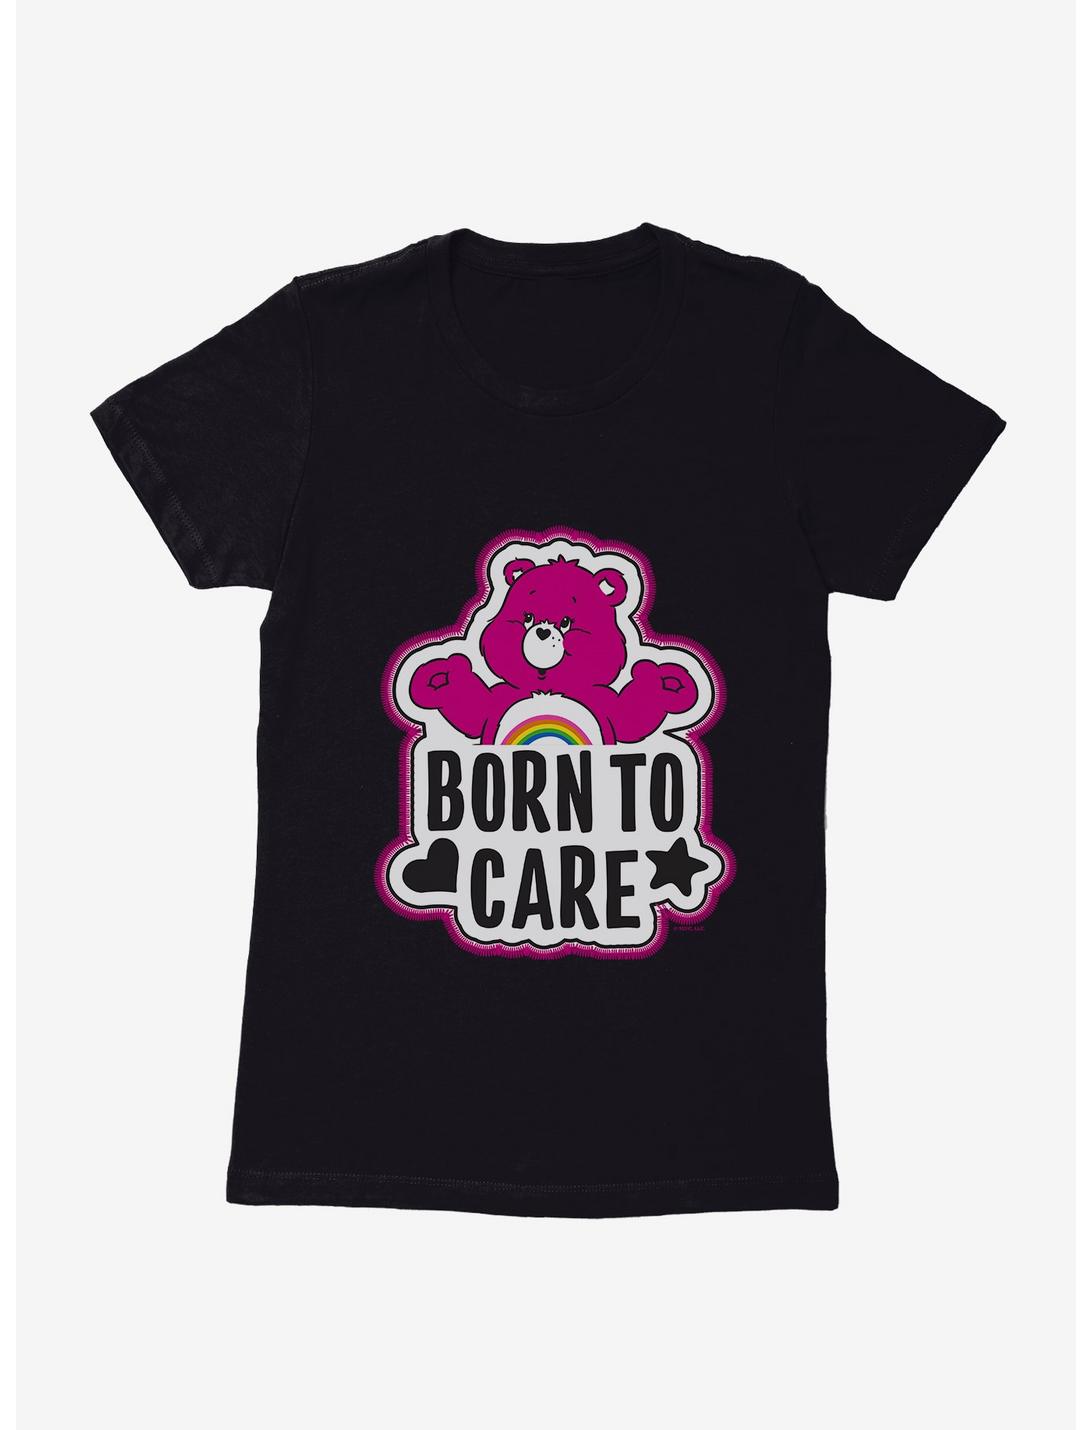 Care Bears Cheer Born To Care Womens T-Shirt, BLACK, hi-res